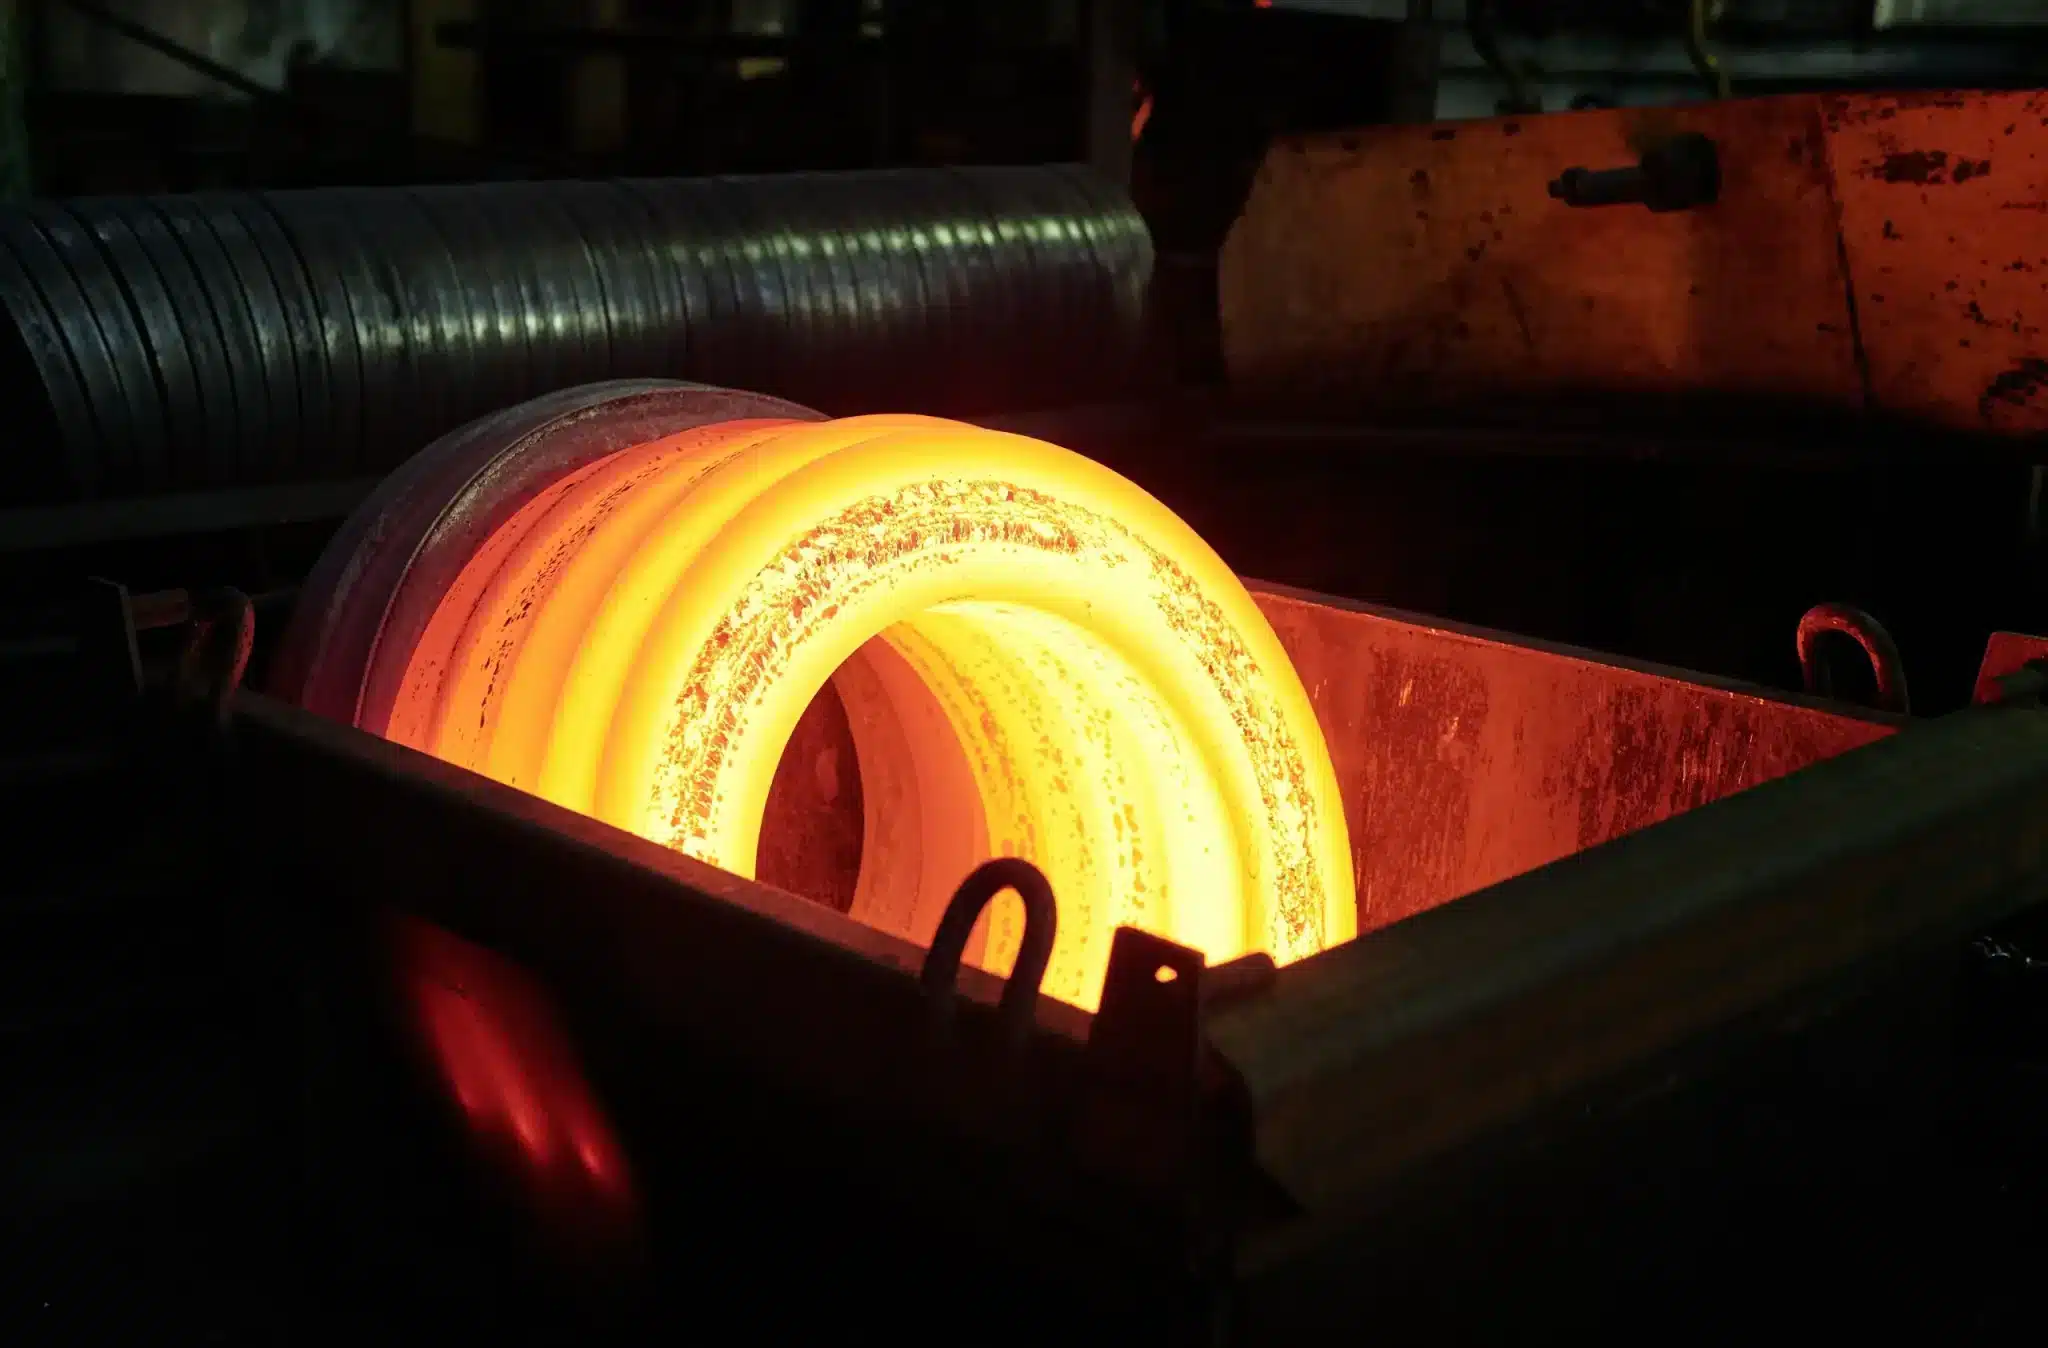 A hot steel coil glowing in an intense orange hue as it's being processed in an industrial setting. The heat emanating from the metal is palpable, highlighting the raw power of manufacturing and metallurgy.